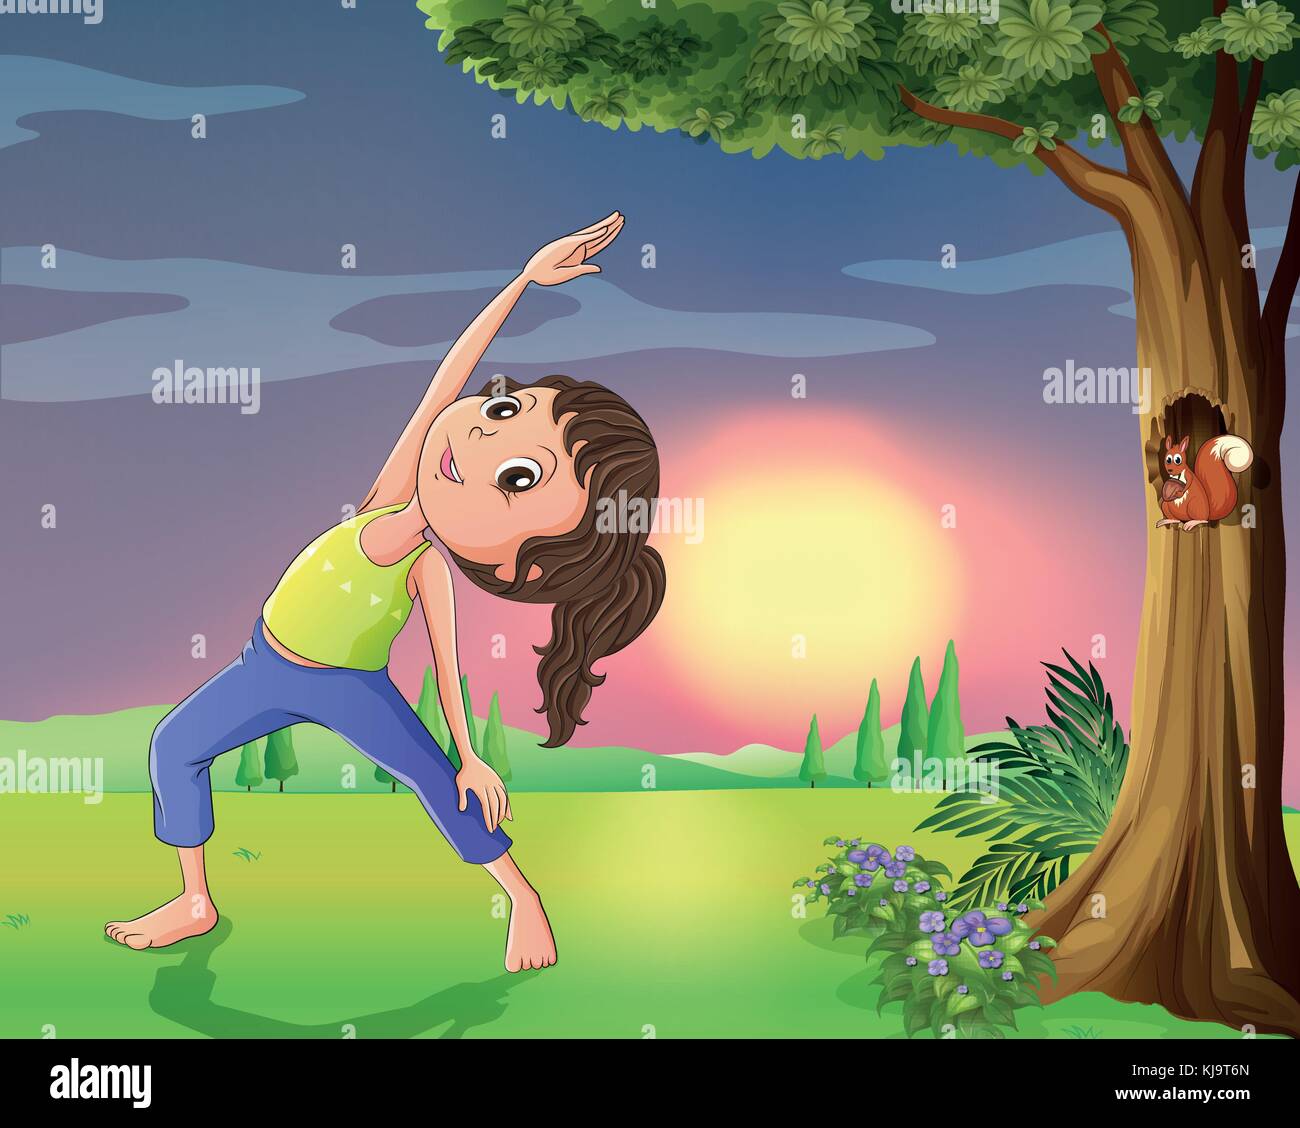 Illustration of a girl exercising near a tree with squirrel Stock Vector